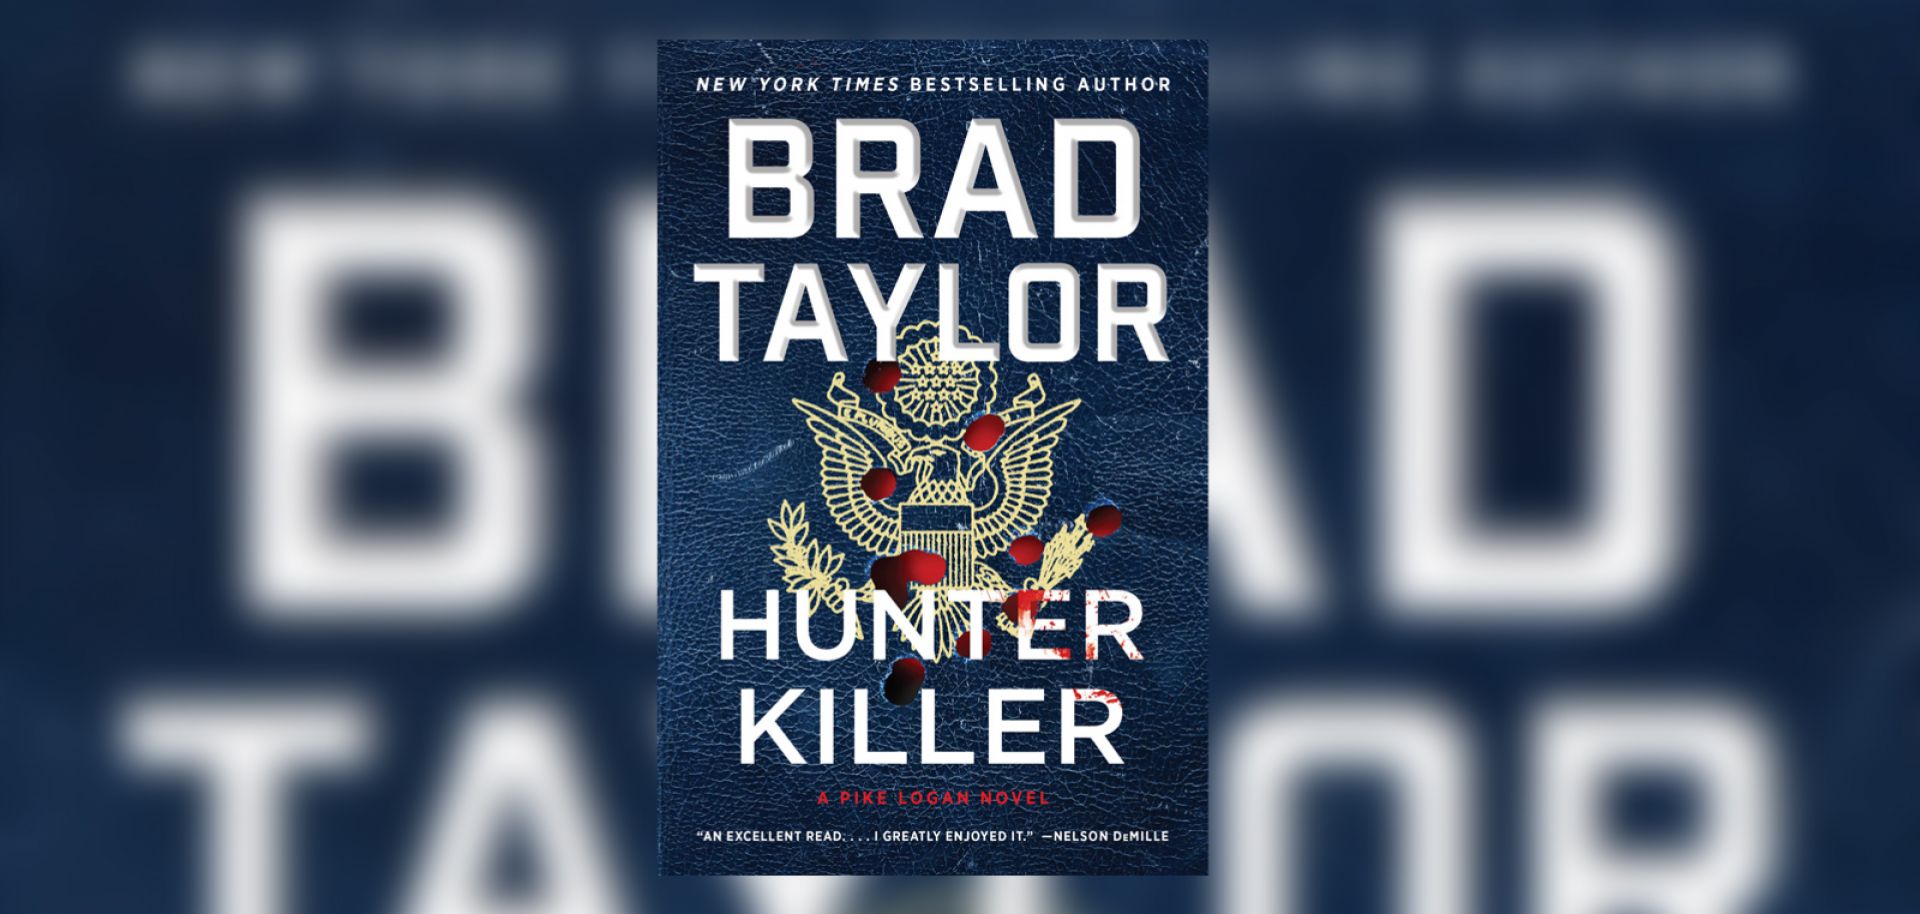 The cover of the book "Hunter Killer" by author Brad Taylor. 